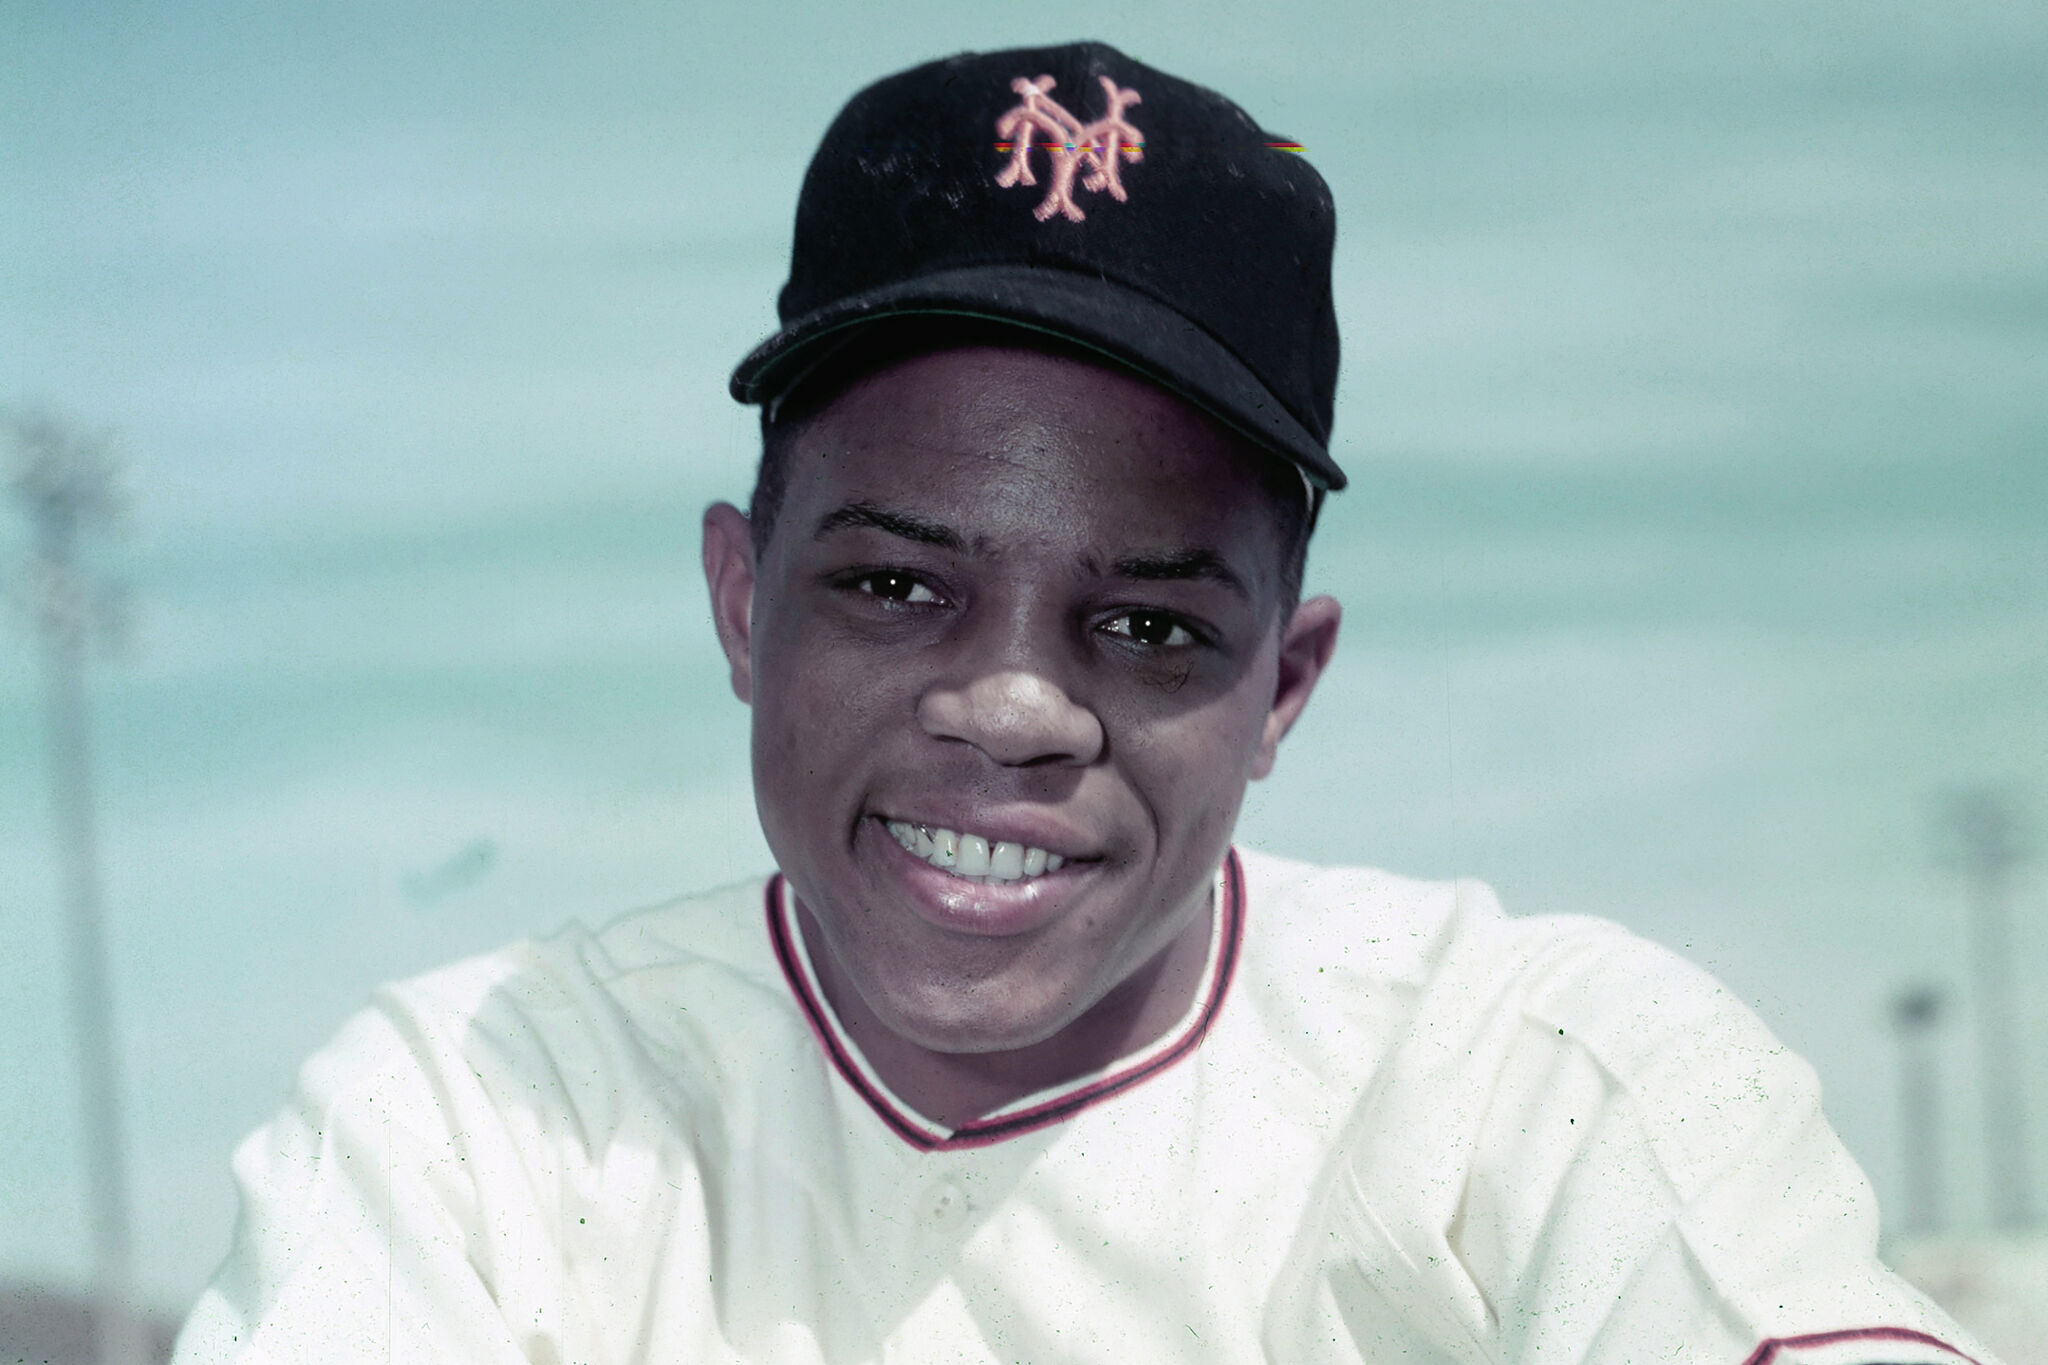 SF Giants legend Willie Mays should be MLB’s logo, says ESPN writer